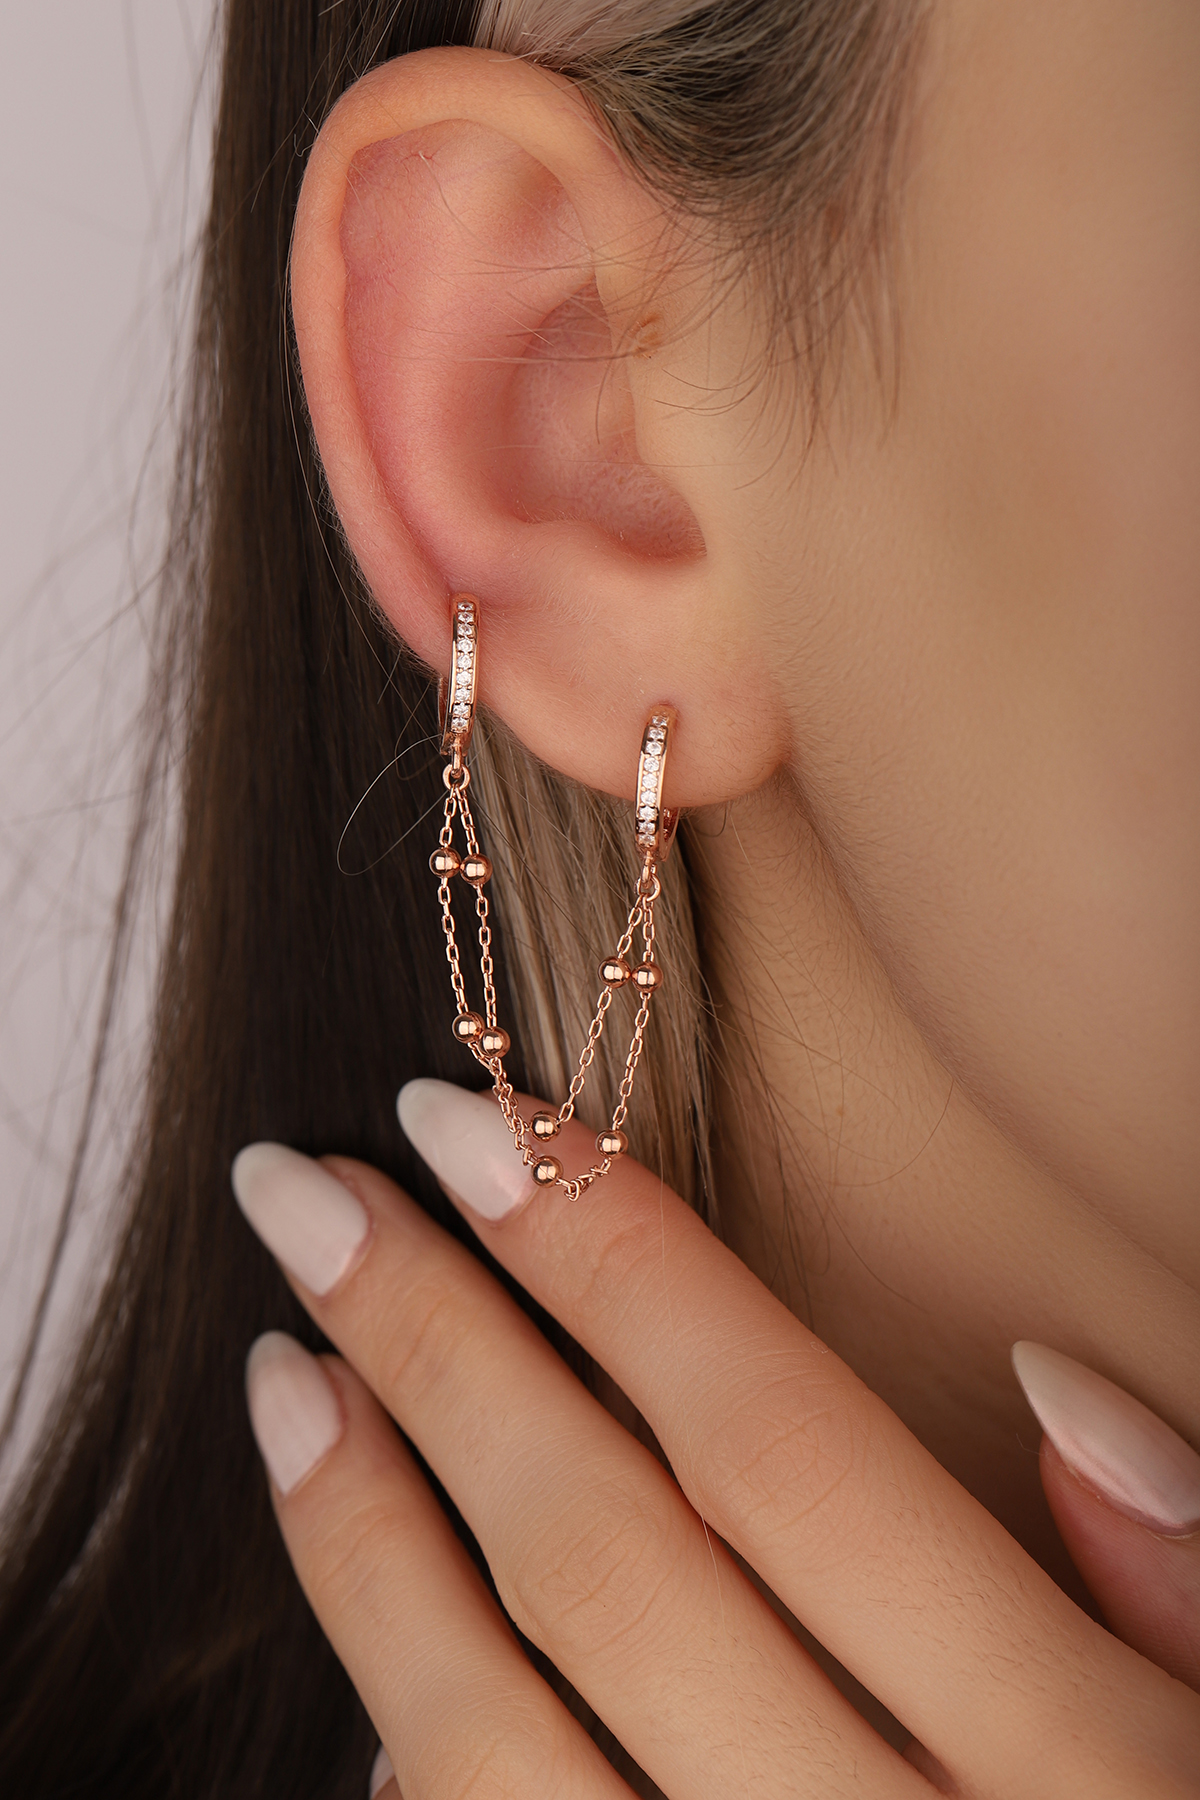 Handmade 20g, 16g Diamond mother of pearl dangled helix double chain  cartilage ear studs, 316l surgical steel, 2 Bars Chain, Helix cartilage  earring - Hi Unni